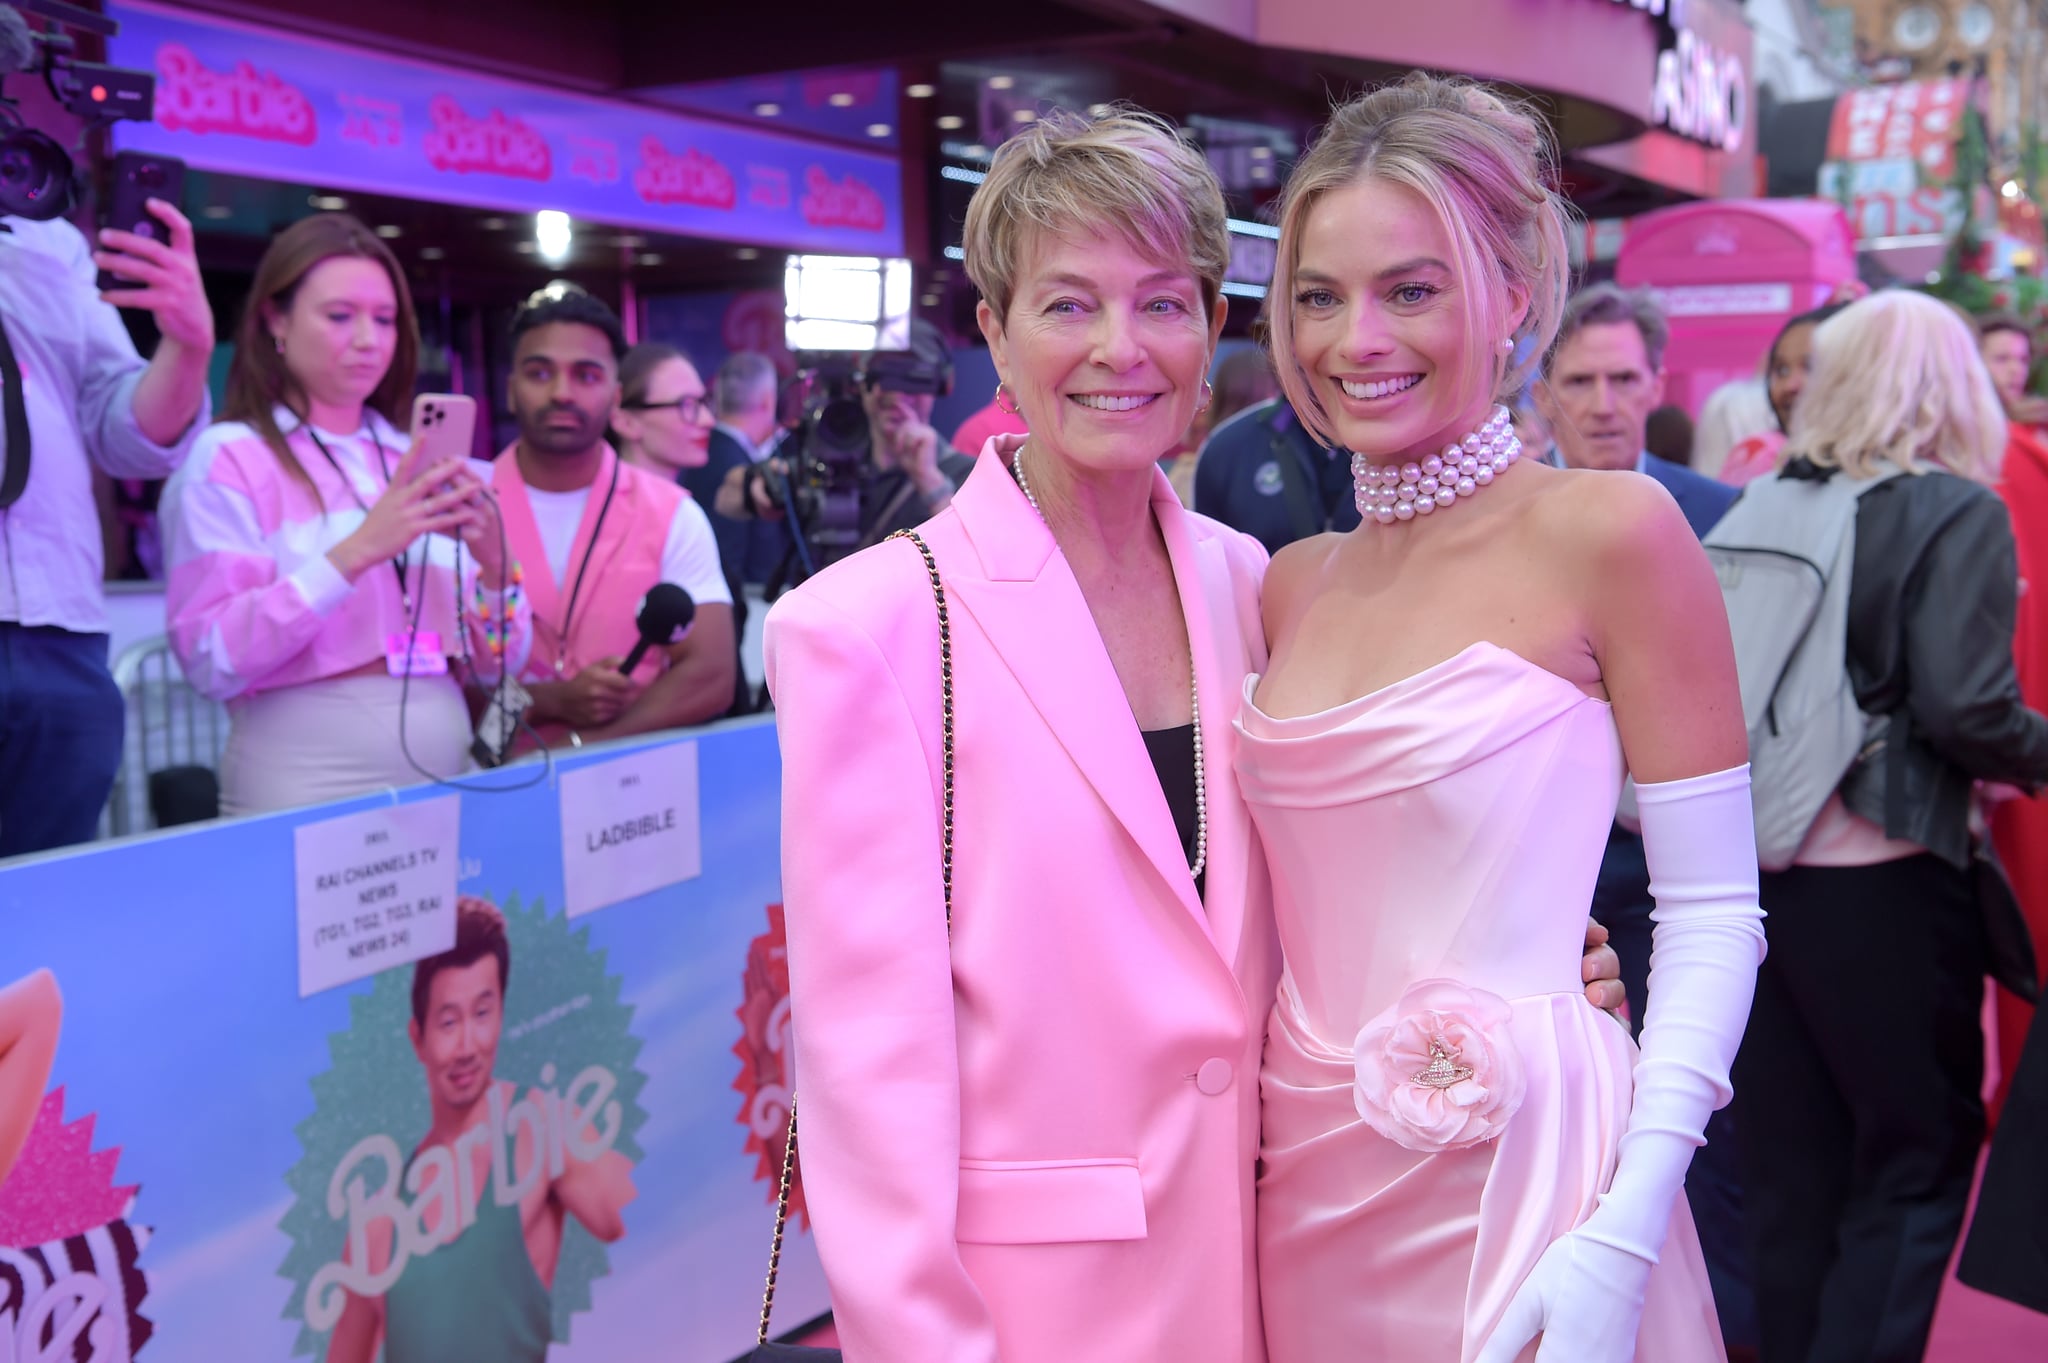 LONDON, ENGLAND - JULY 12: Sarie Kessler and Margot Robbie attend The European Premiere Of 